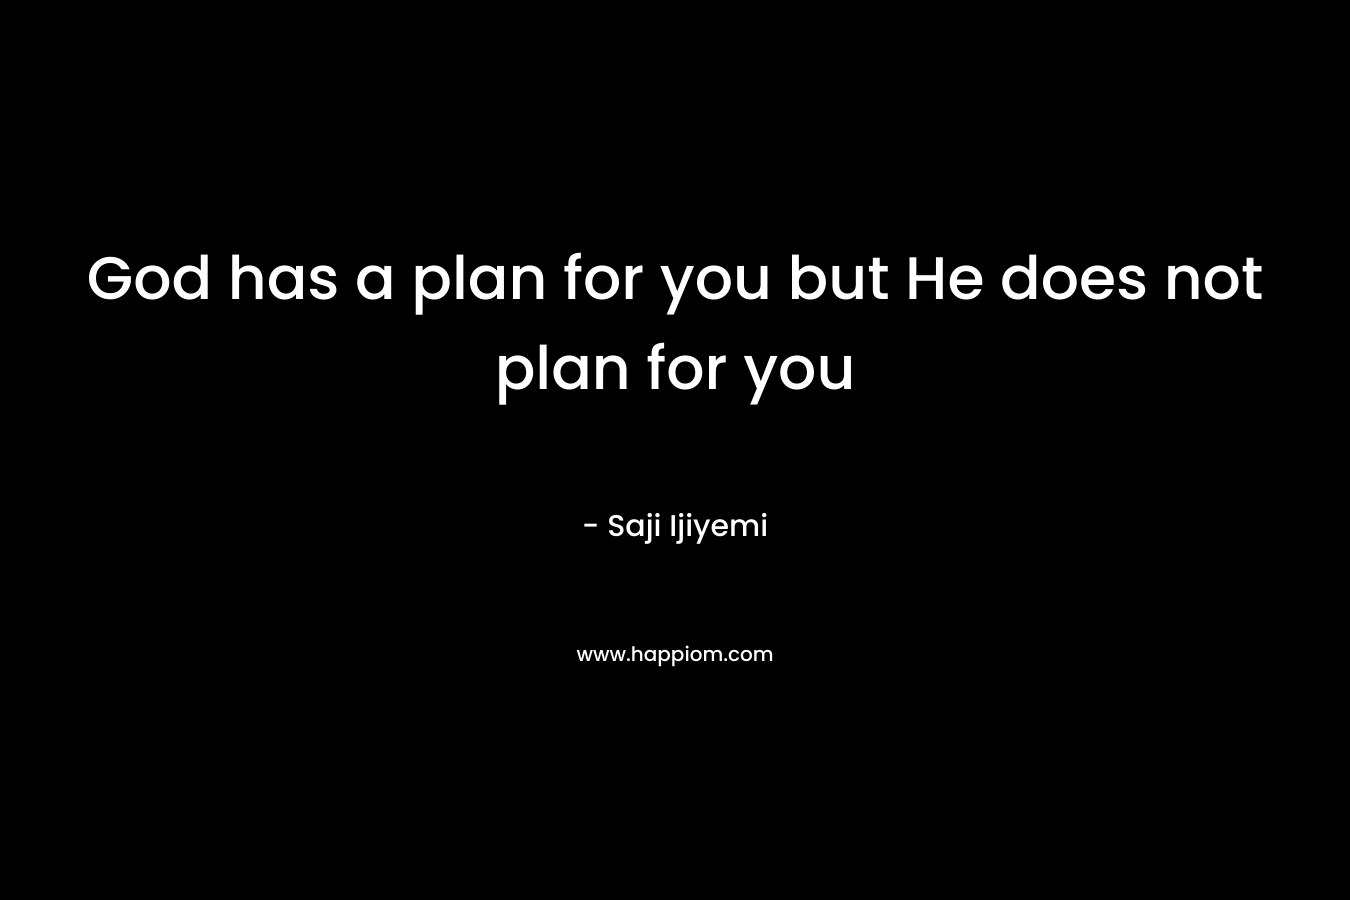 God has a plan for you but He does not plan for you